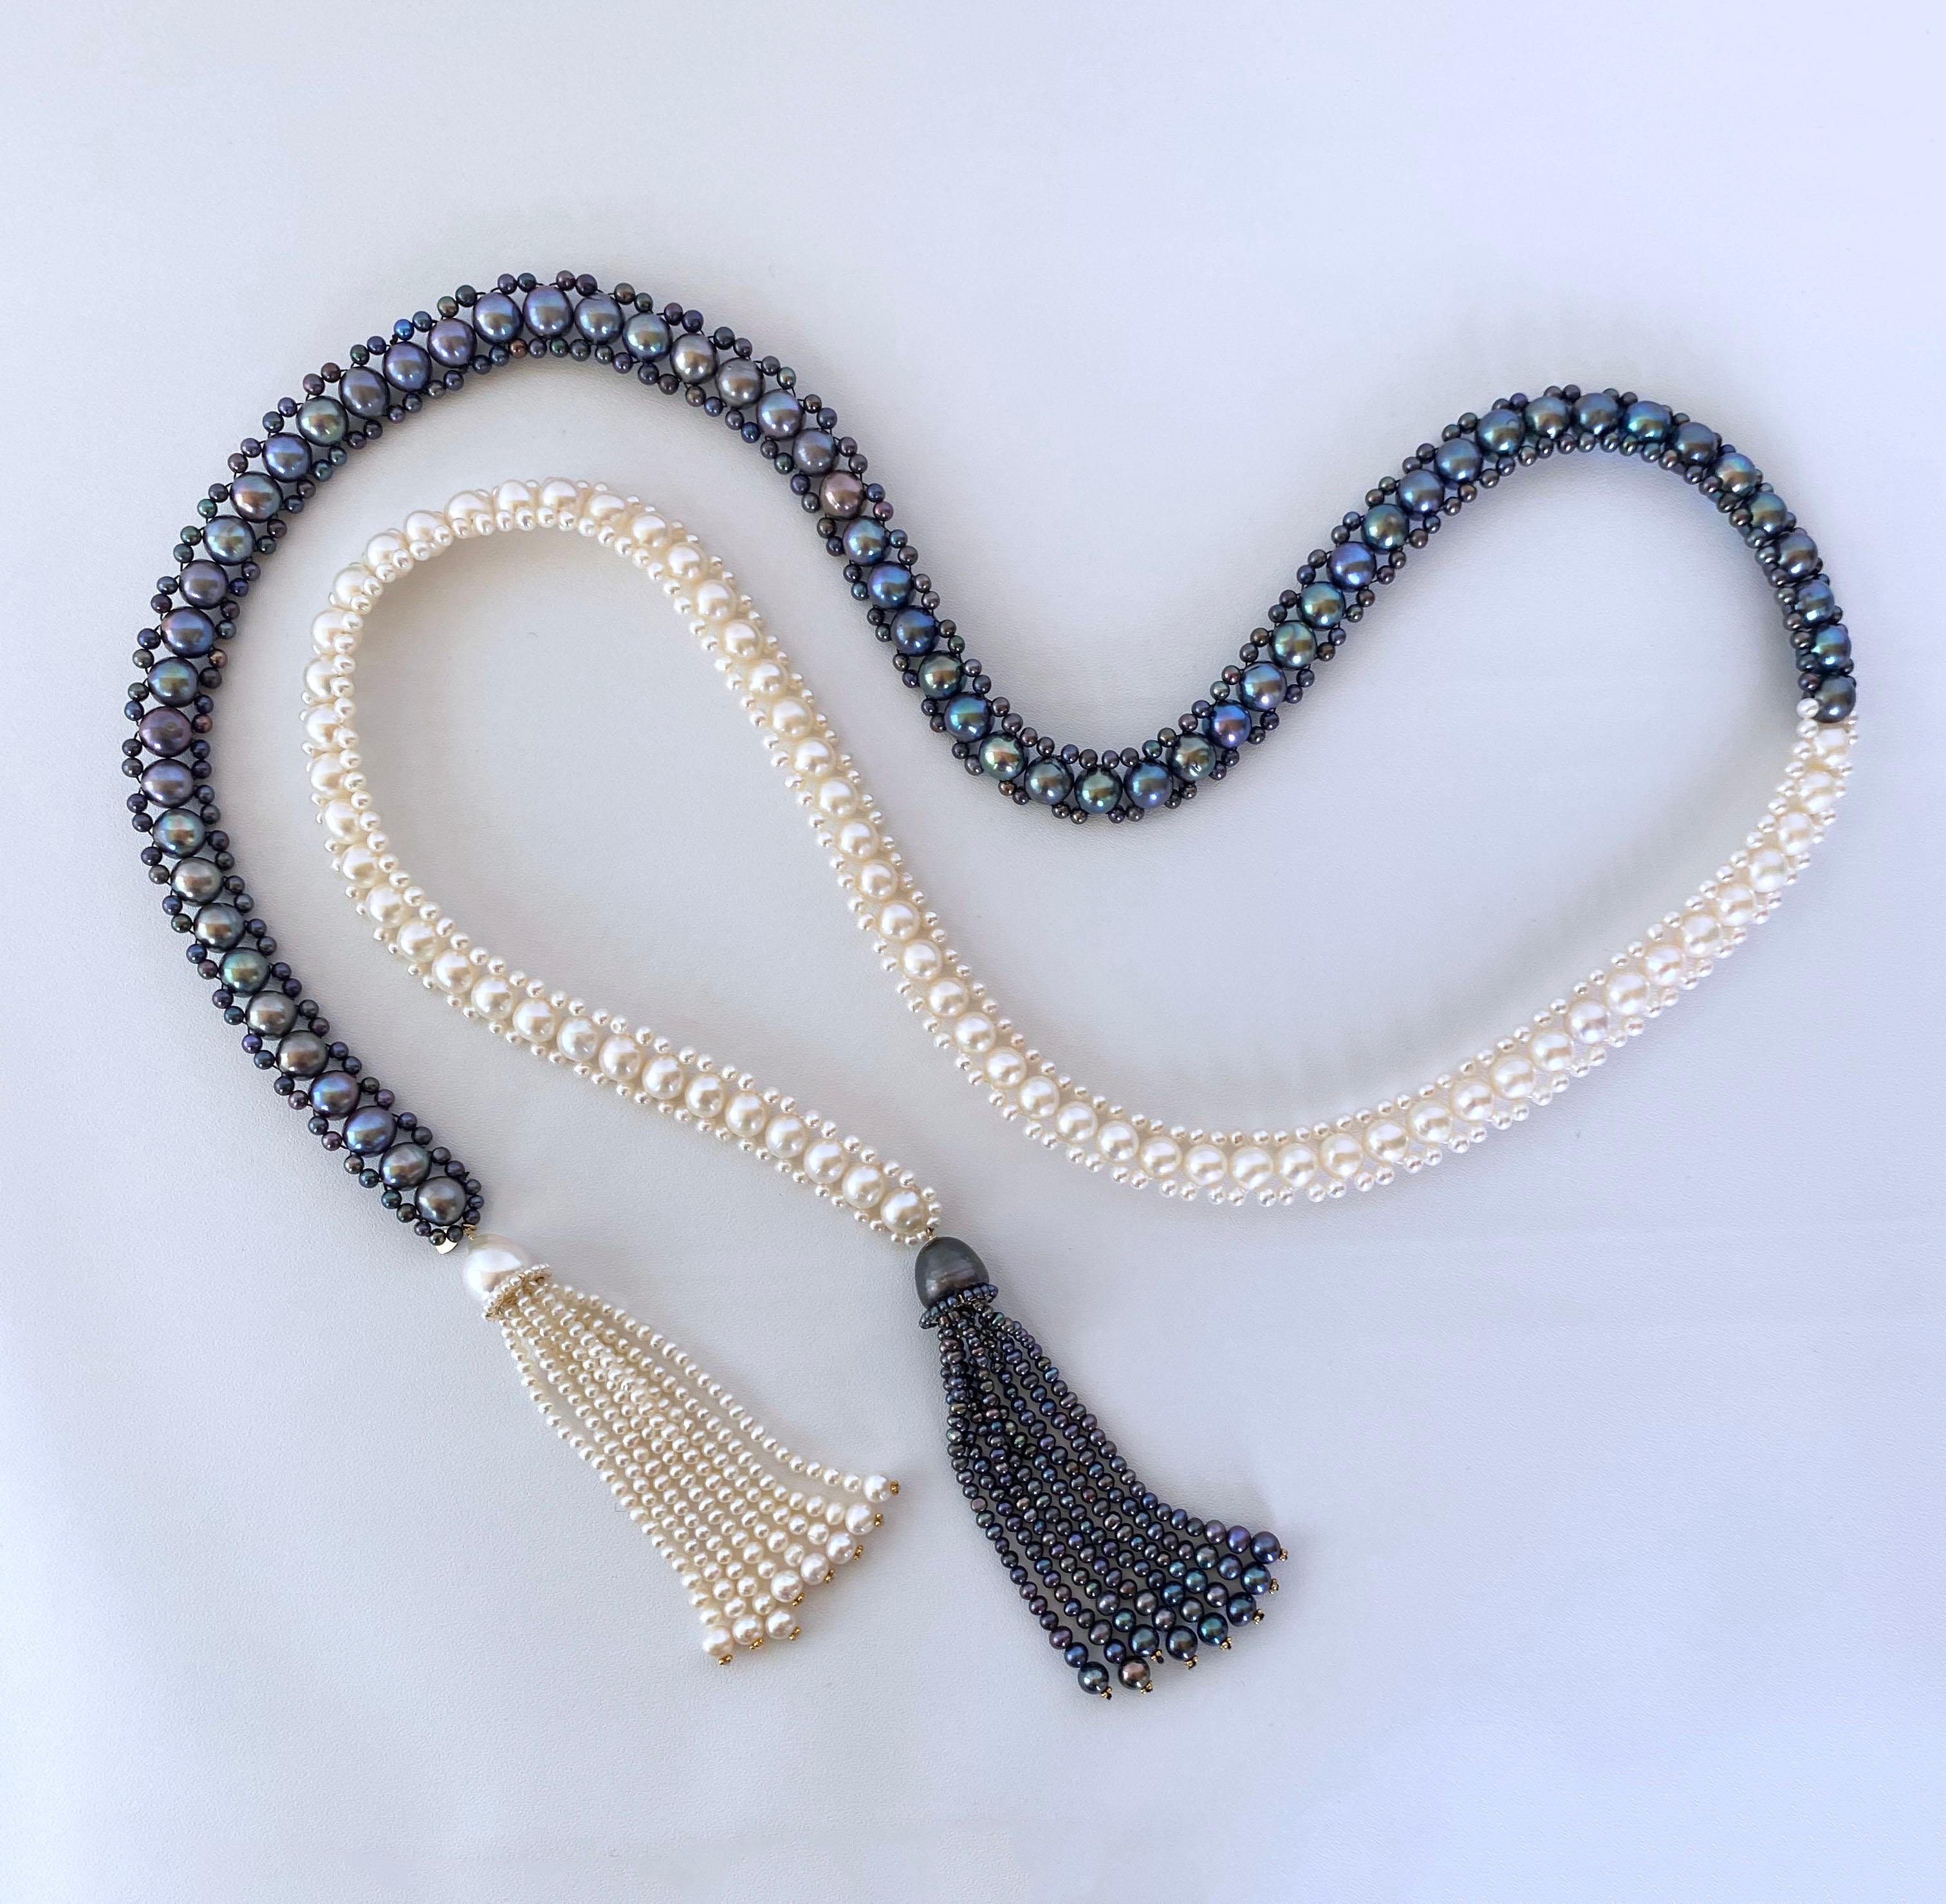 Marina J. Black and White All Pearl Woven Sautoir with pearl tassels & 14K  Gold For Sale 4